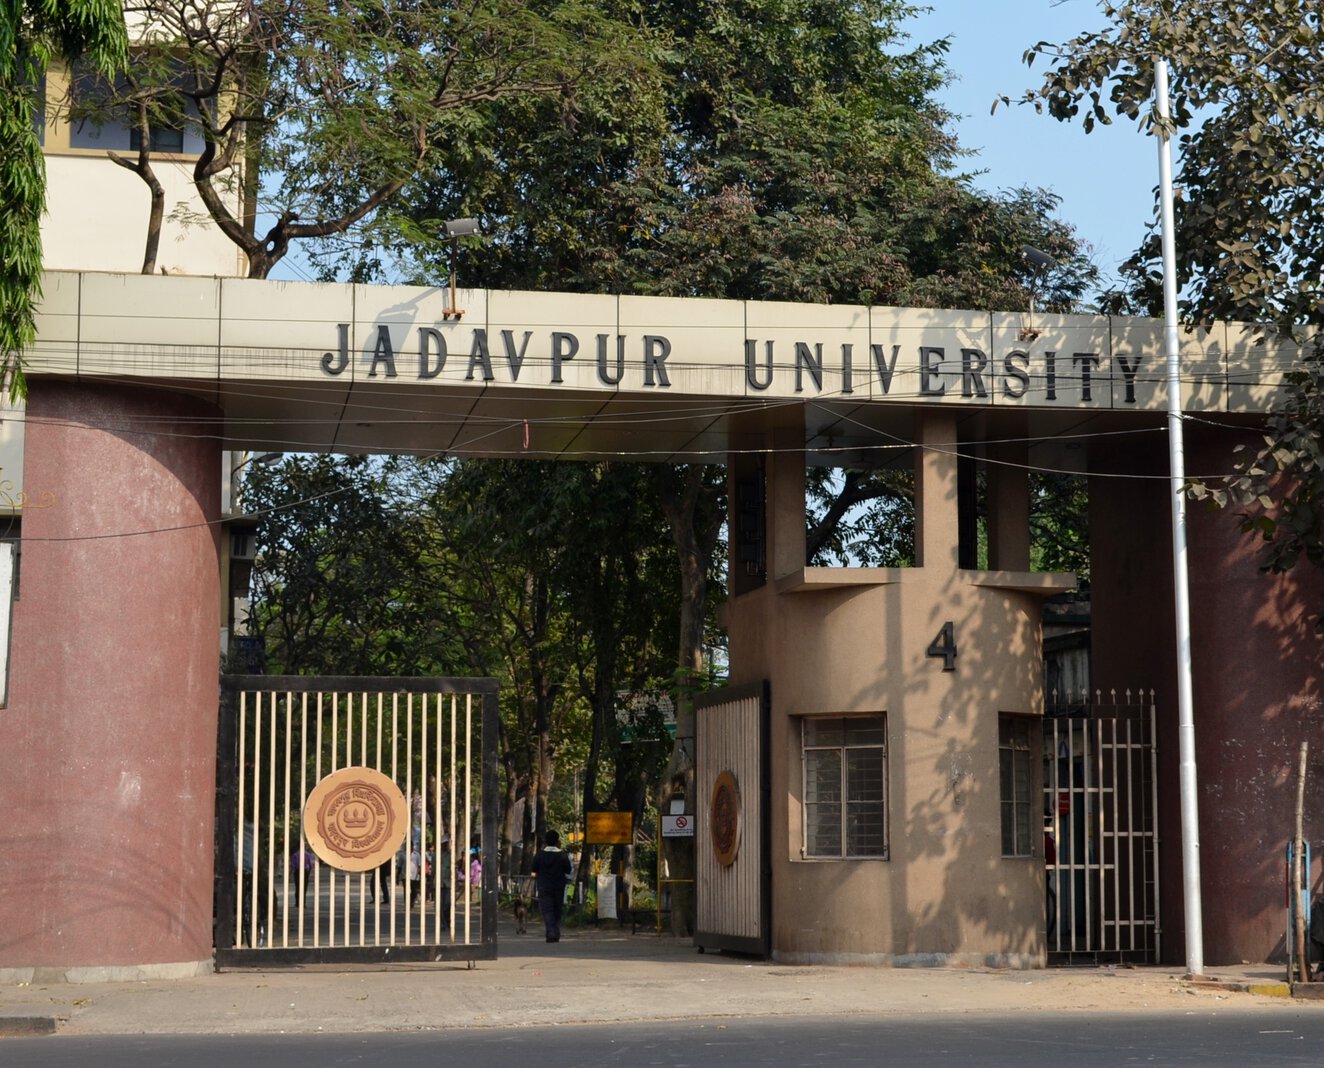 Gate of Jadavpur University with name written above and with one of two gate doors open.